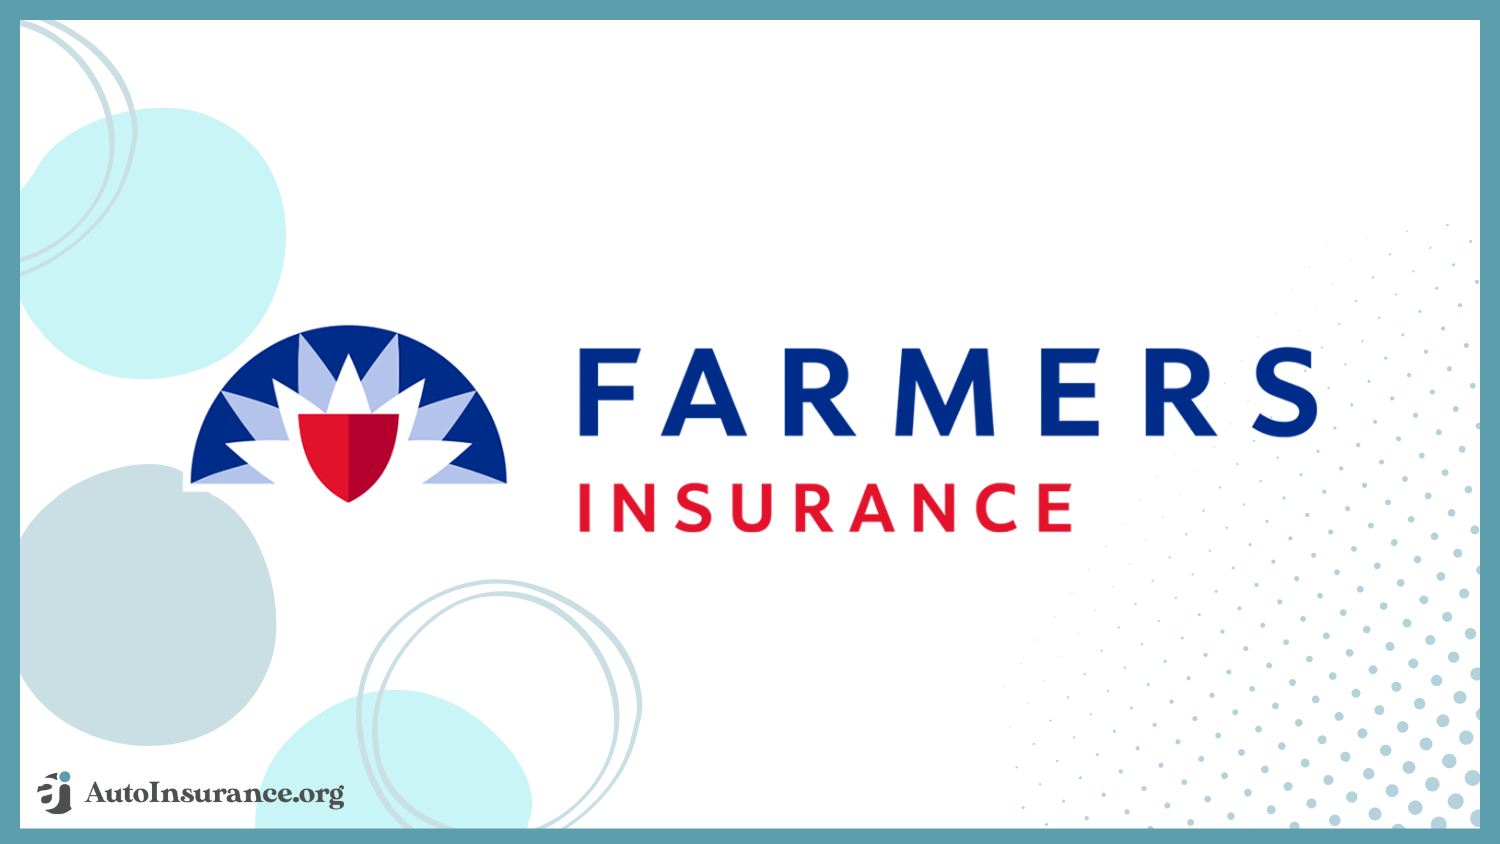 Farmers Best Auto Insurance Companies for Multiple Vehicles